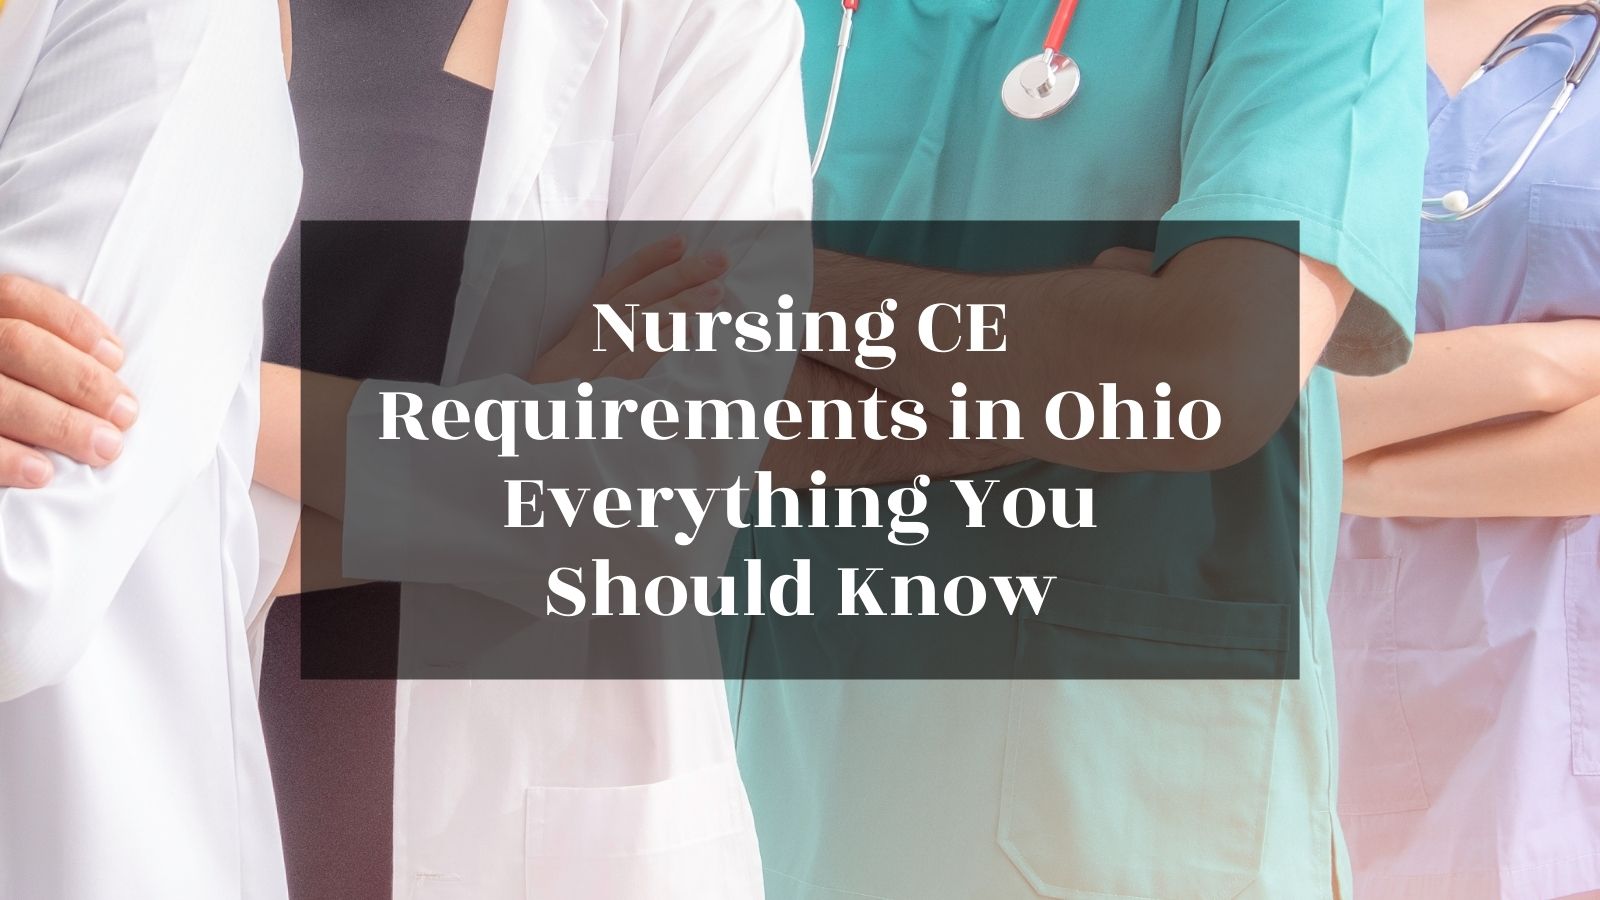 Nursing CE Requirements in Ohio - Everything You Should Know